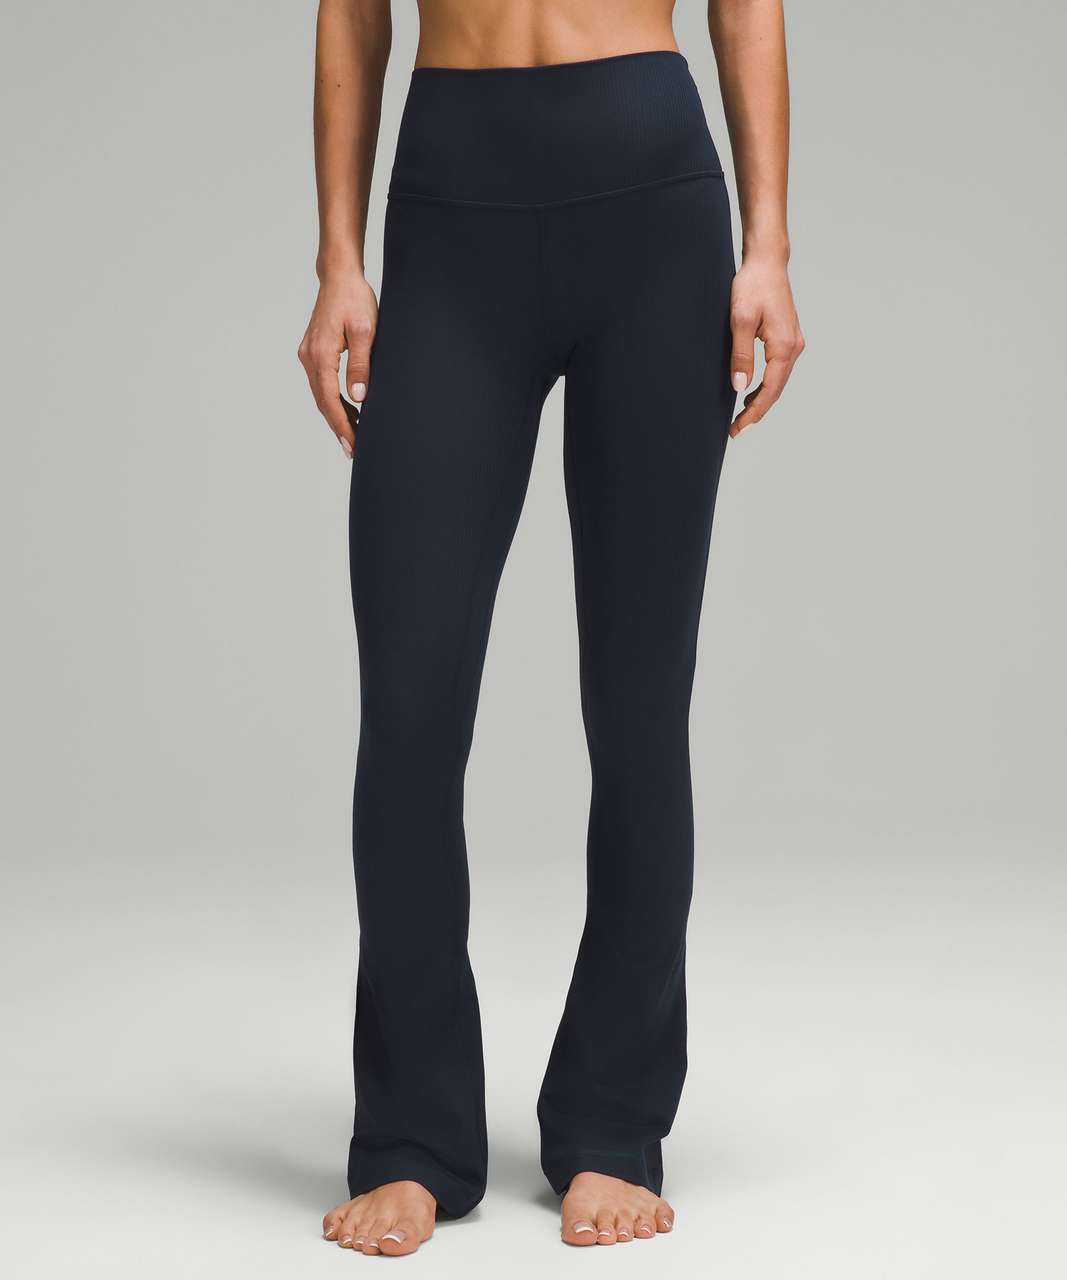 Comparing @lululemon groove pant with the align mini flare. I